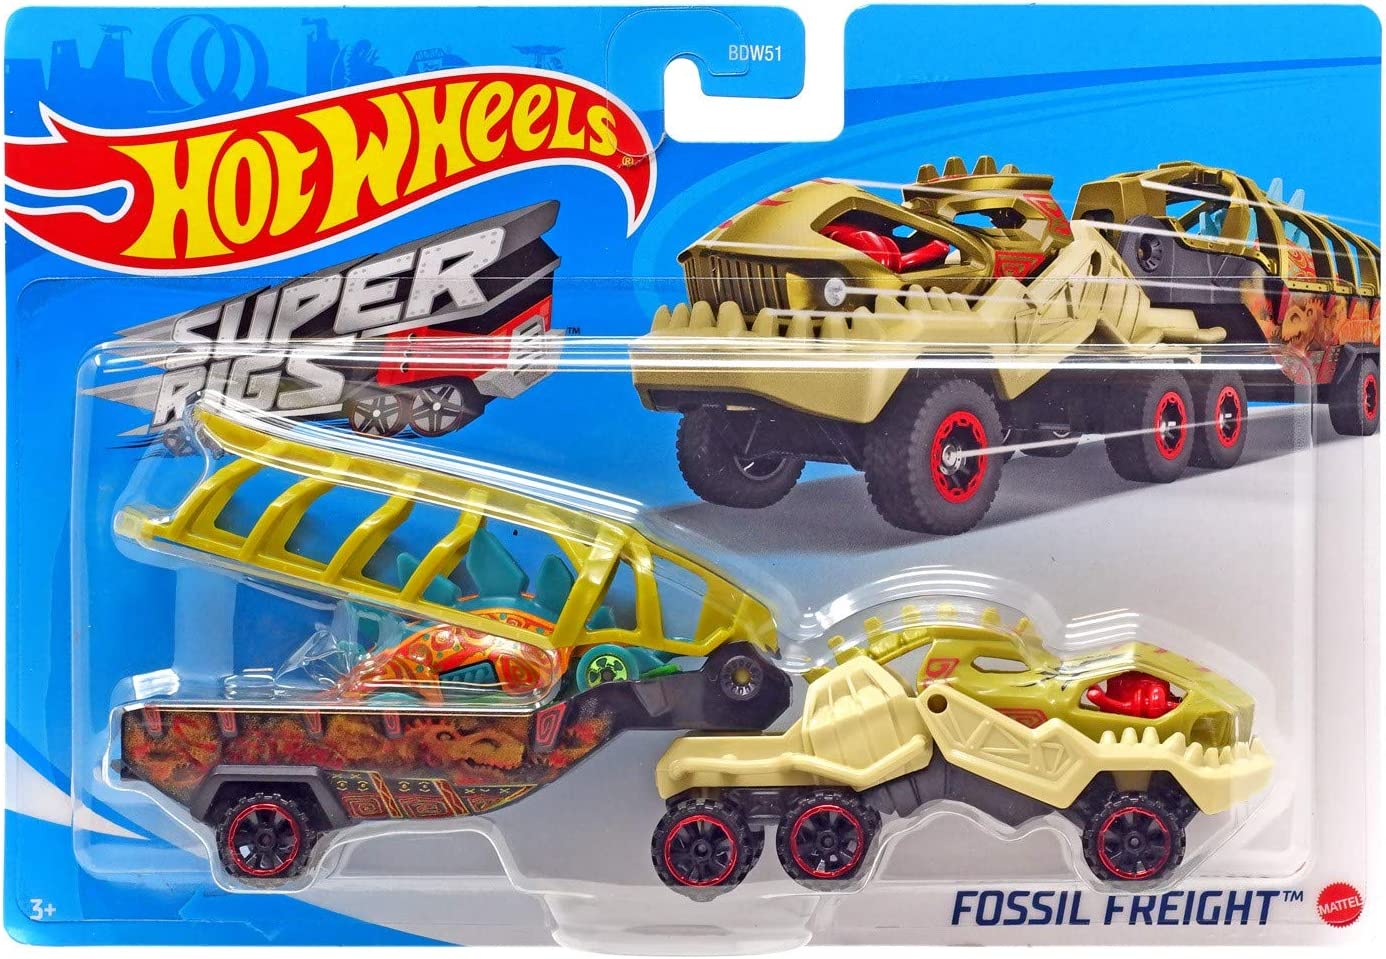 Hot Wheels Super Rigs Fossil Freight